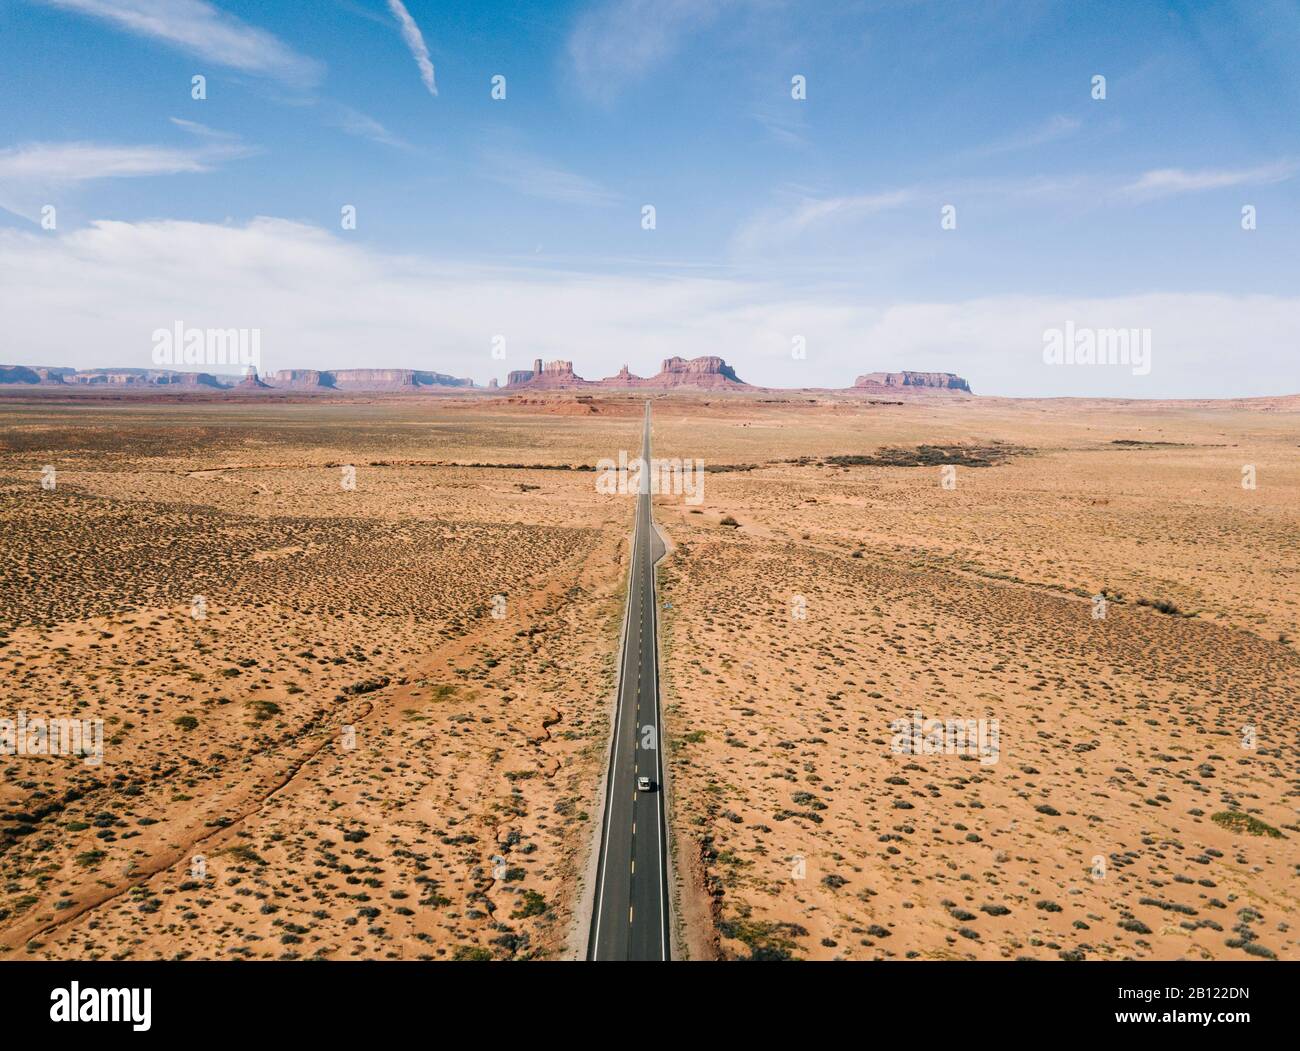 A highway in the desert of USA aerial view from the air Stock Photo